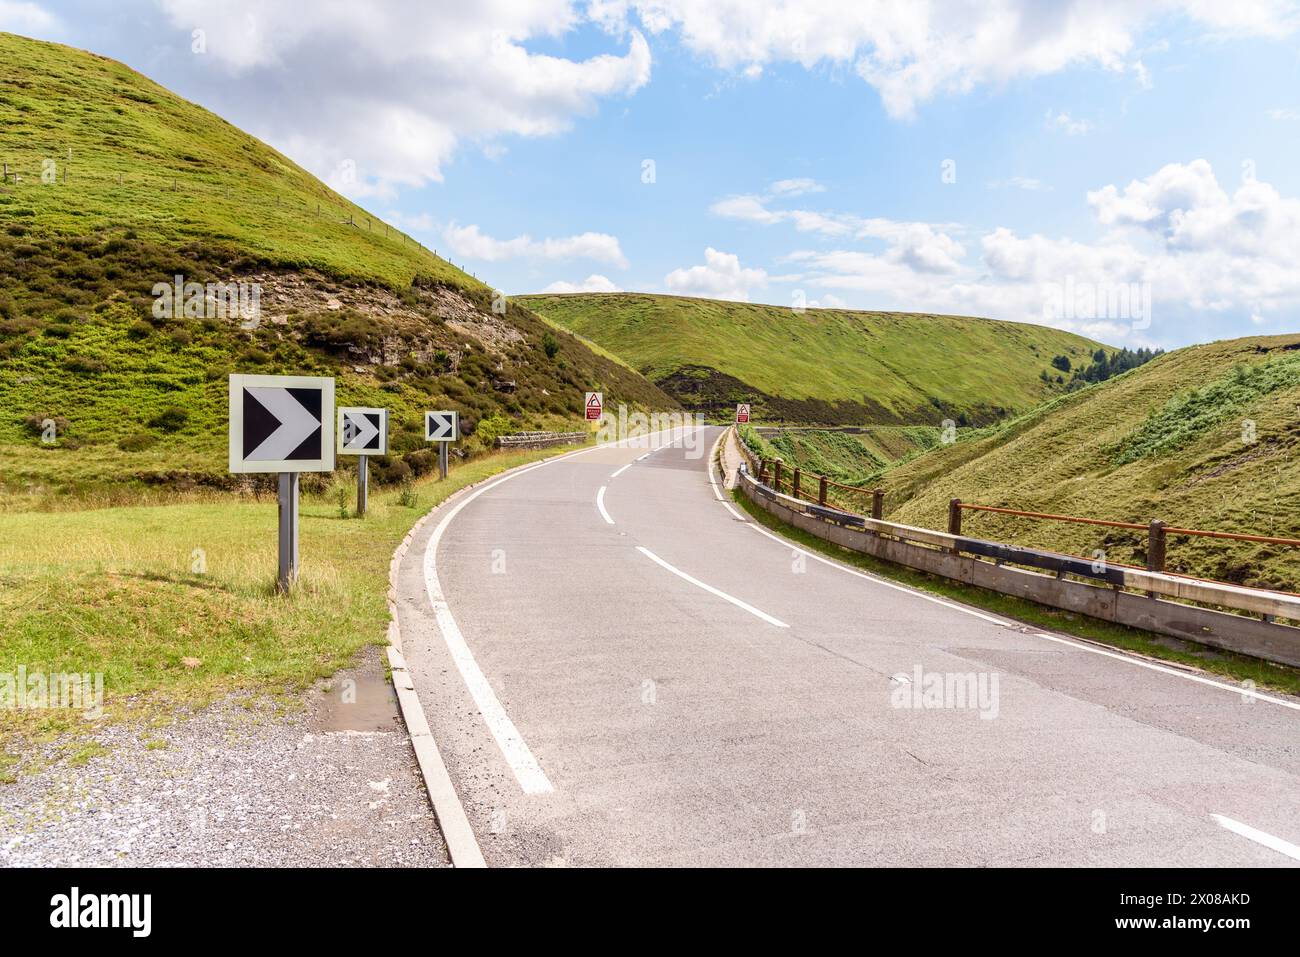 Chevron road signs along a sharp bend along a winding mountain pass road in England on a partly cloudy summer day Stock Photo